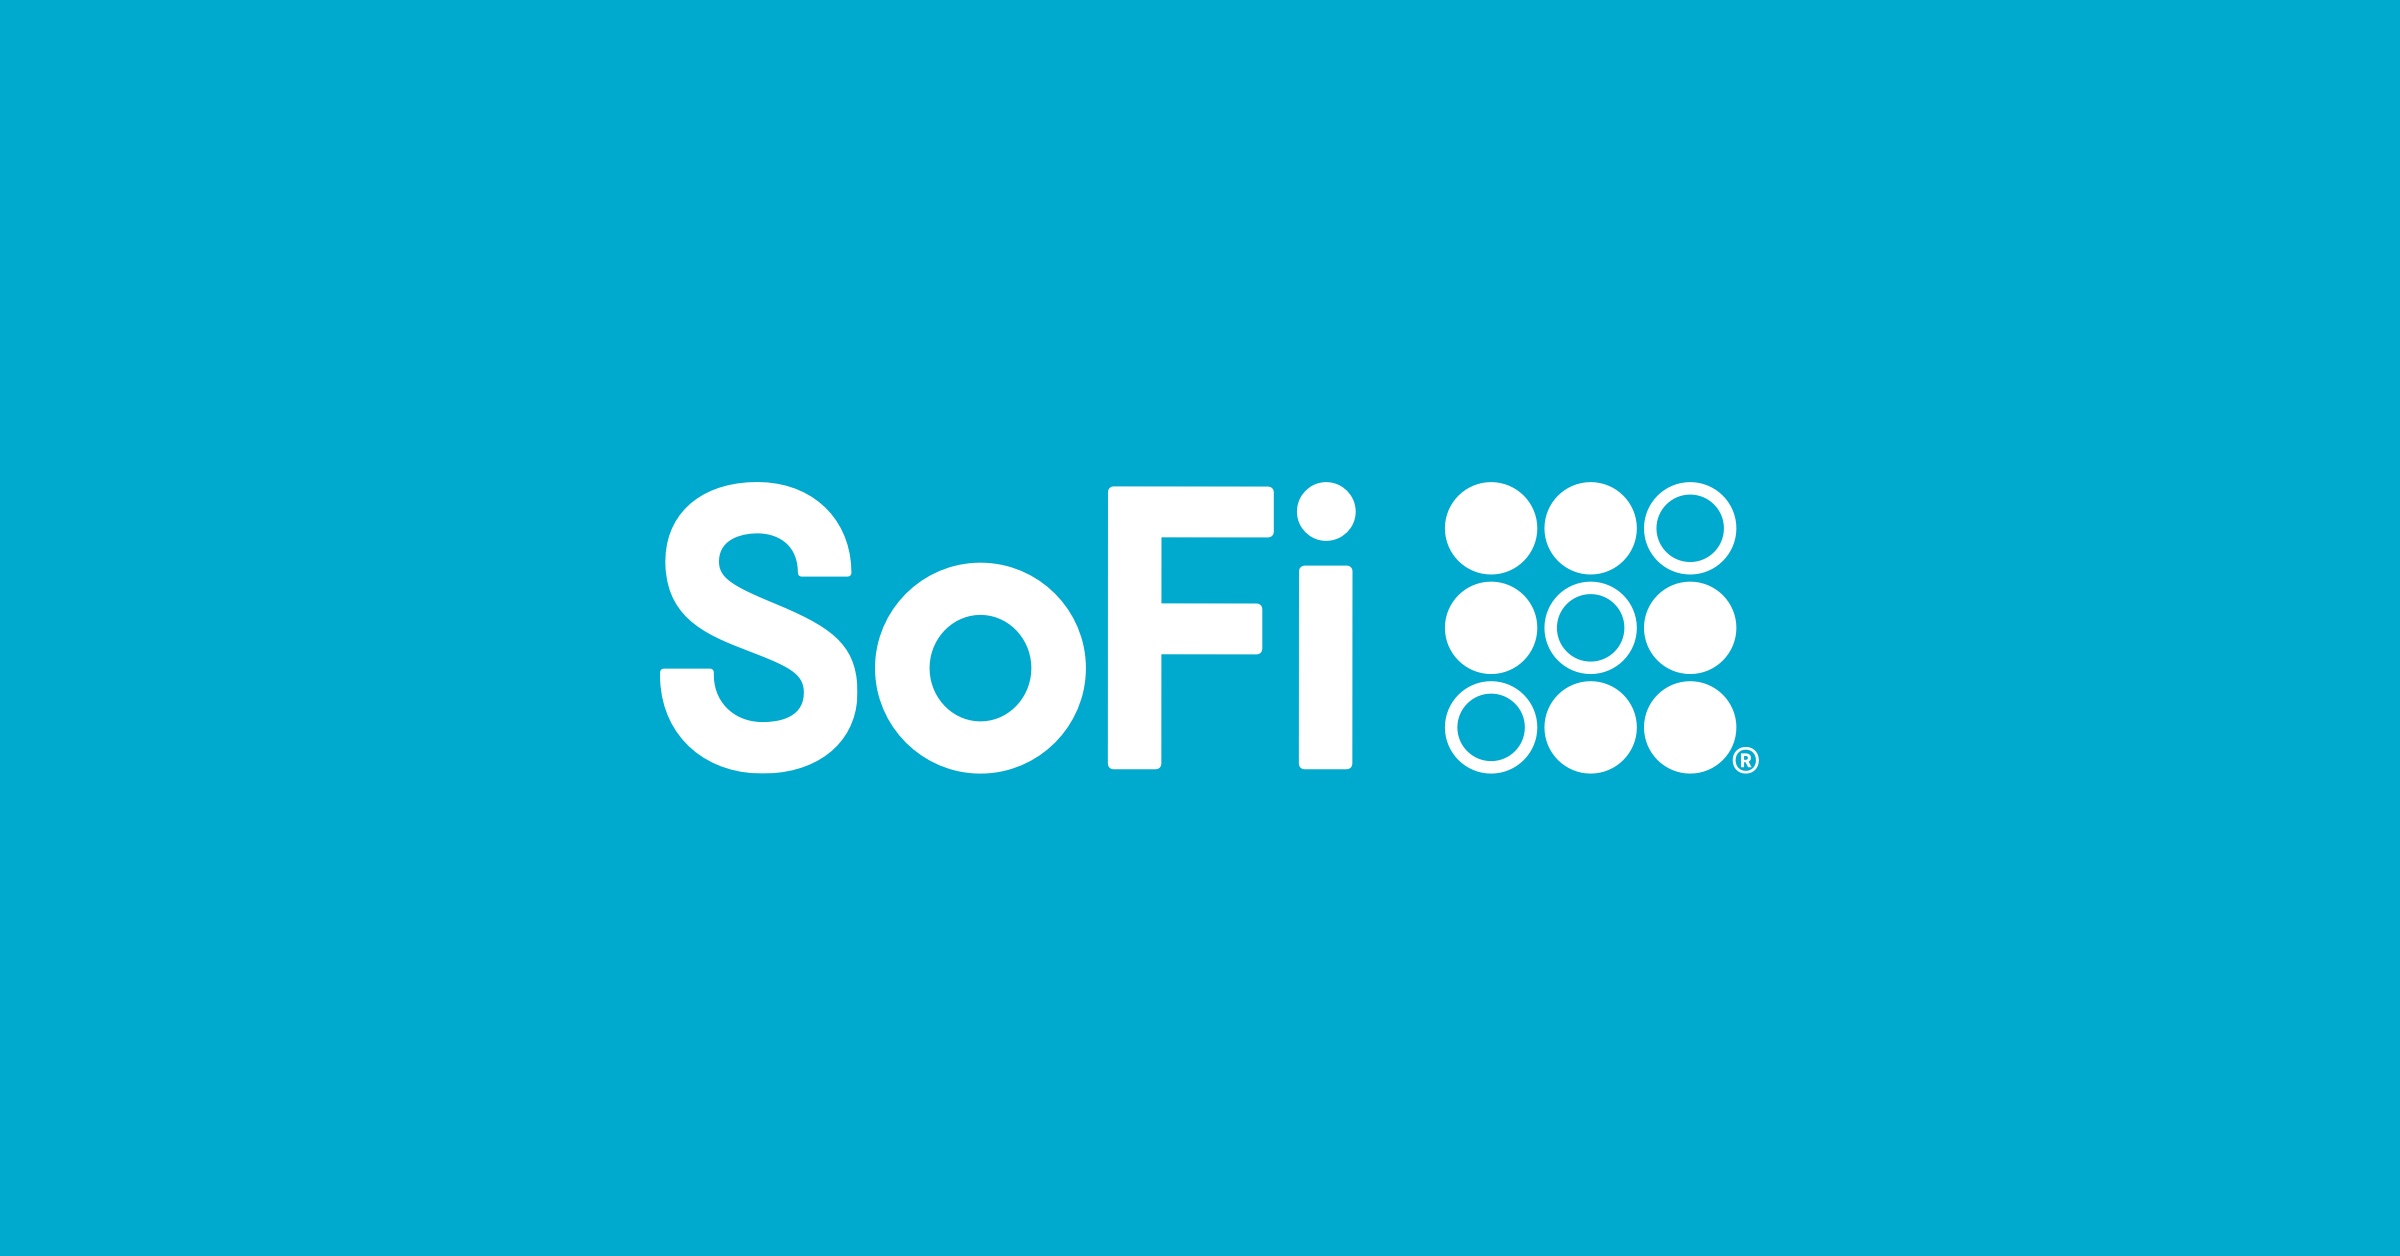 Learn more about the SoFi personal loan in our full review! Source: SoFi